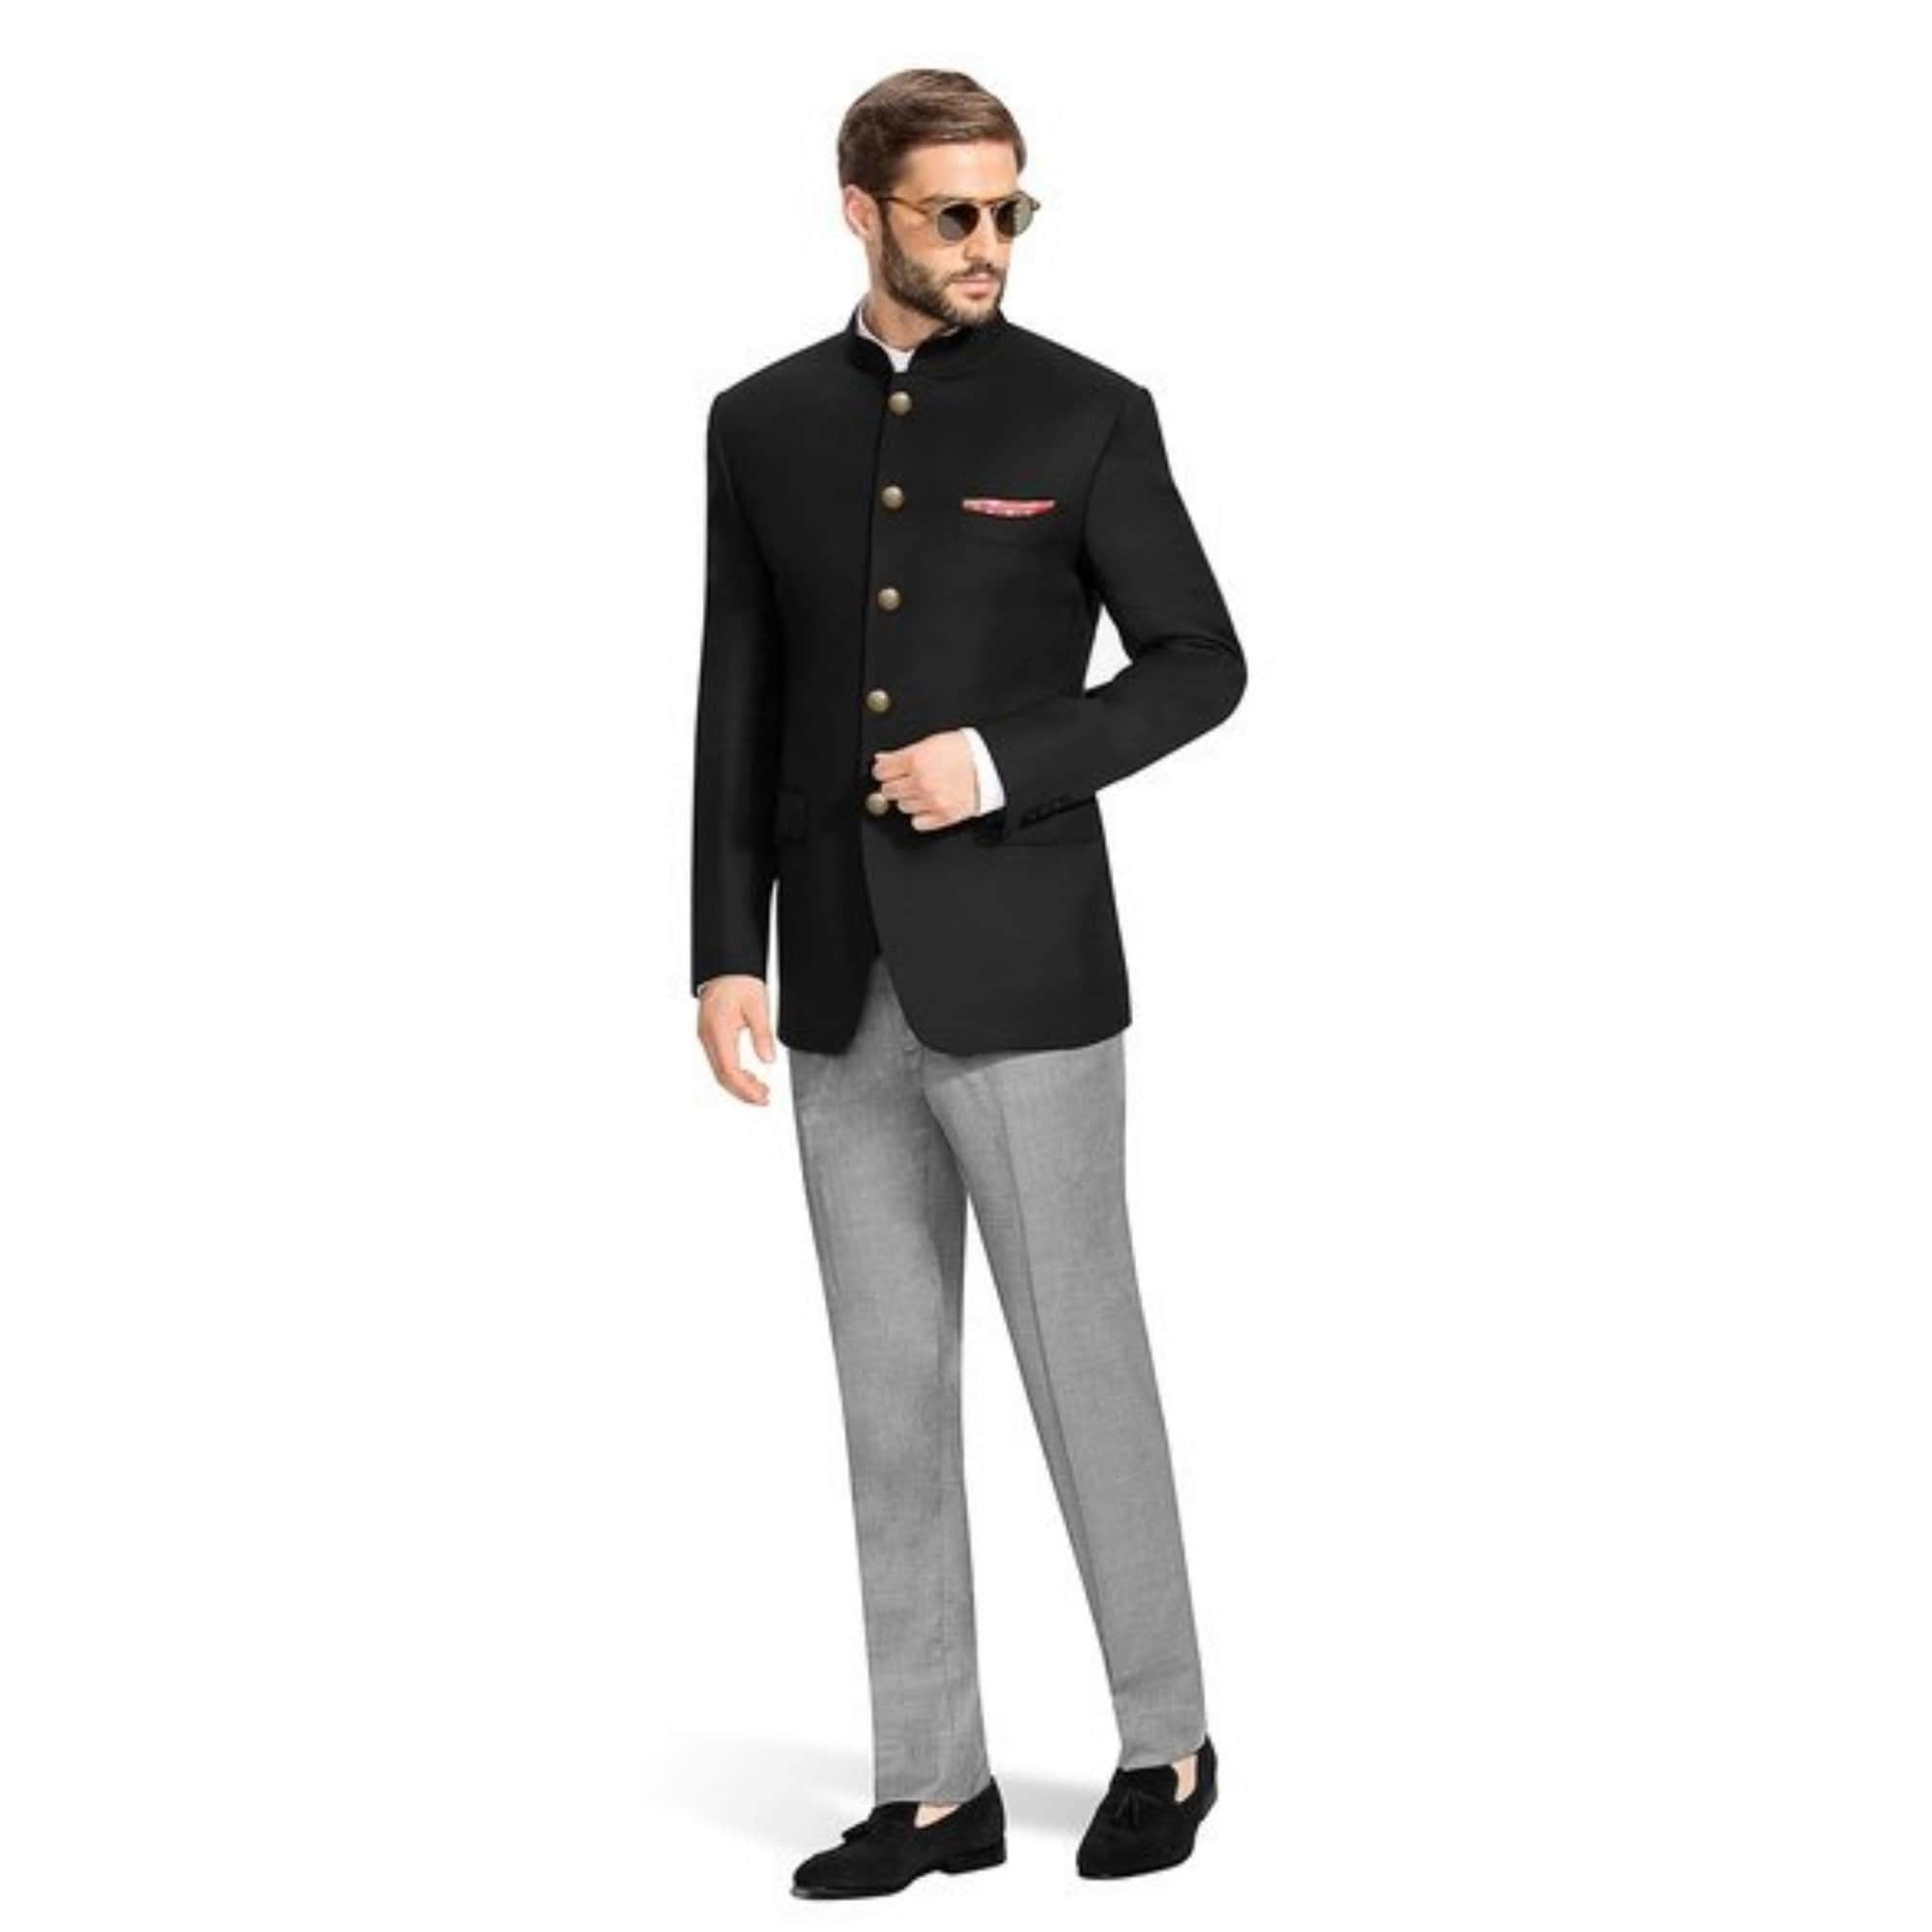 20+ Latest Designs Jodhpuri Suit For Men | New Collections | Fashion suits  for men, Indian wedding suits men, Jodhpuri suits for men